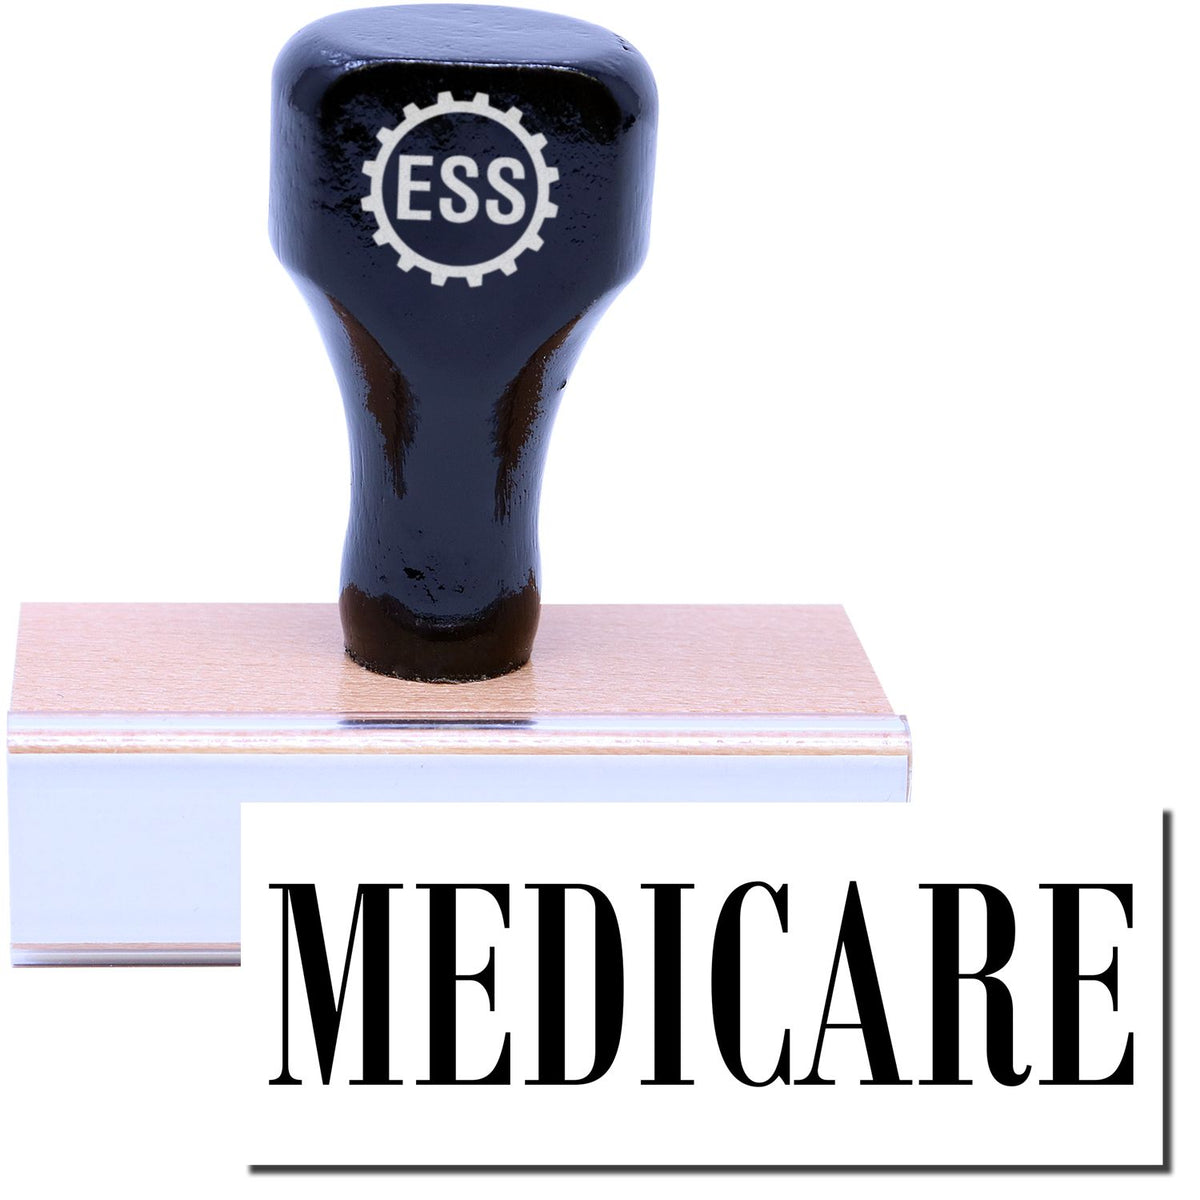 A stock office rubber stamp with a stamped image showing how the text &quot;MEDICARE&quot; in a large font is displayed after stamping.